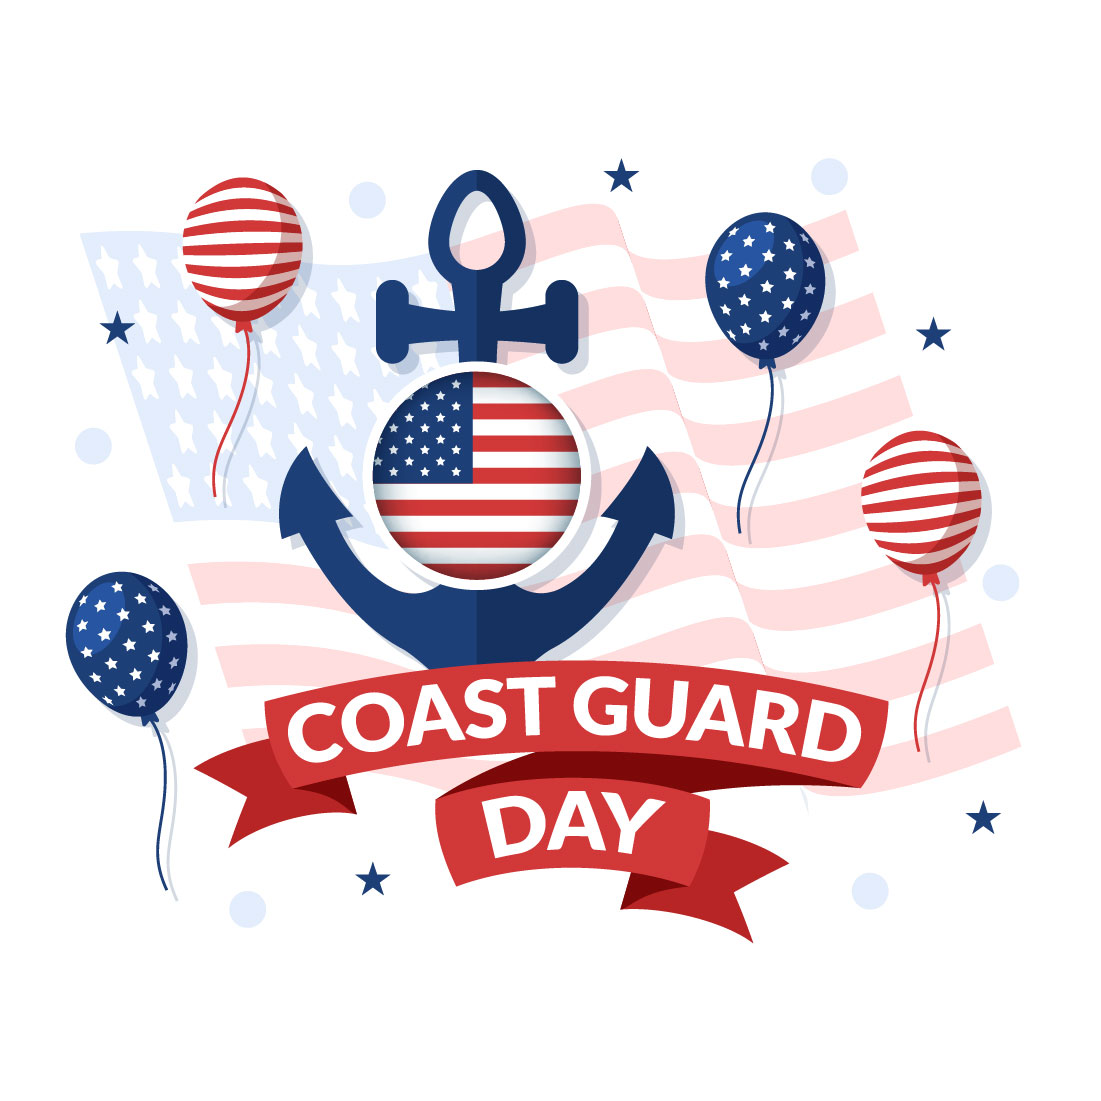 14 United States Coast Guard Day Illustration preview image.